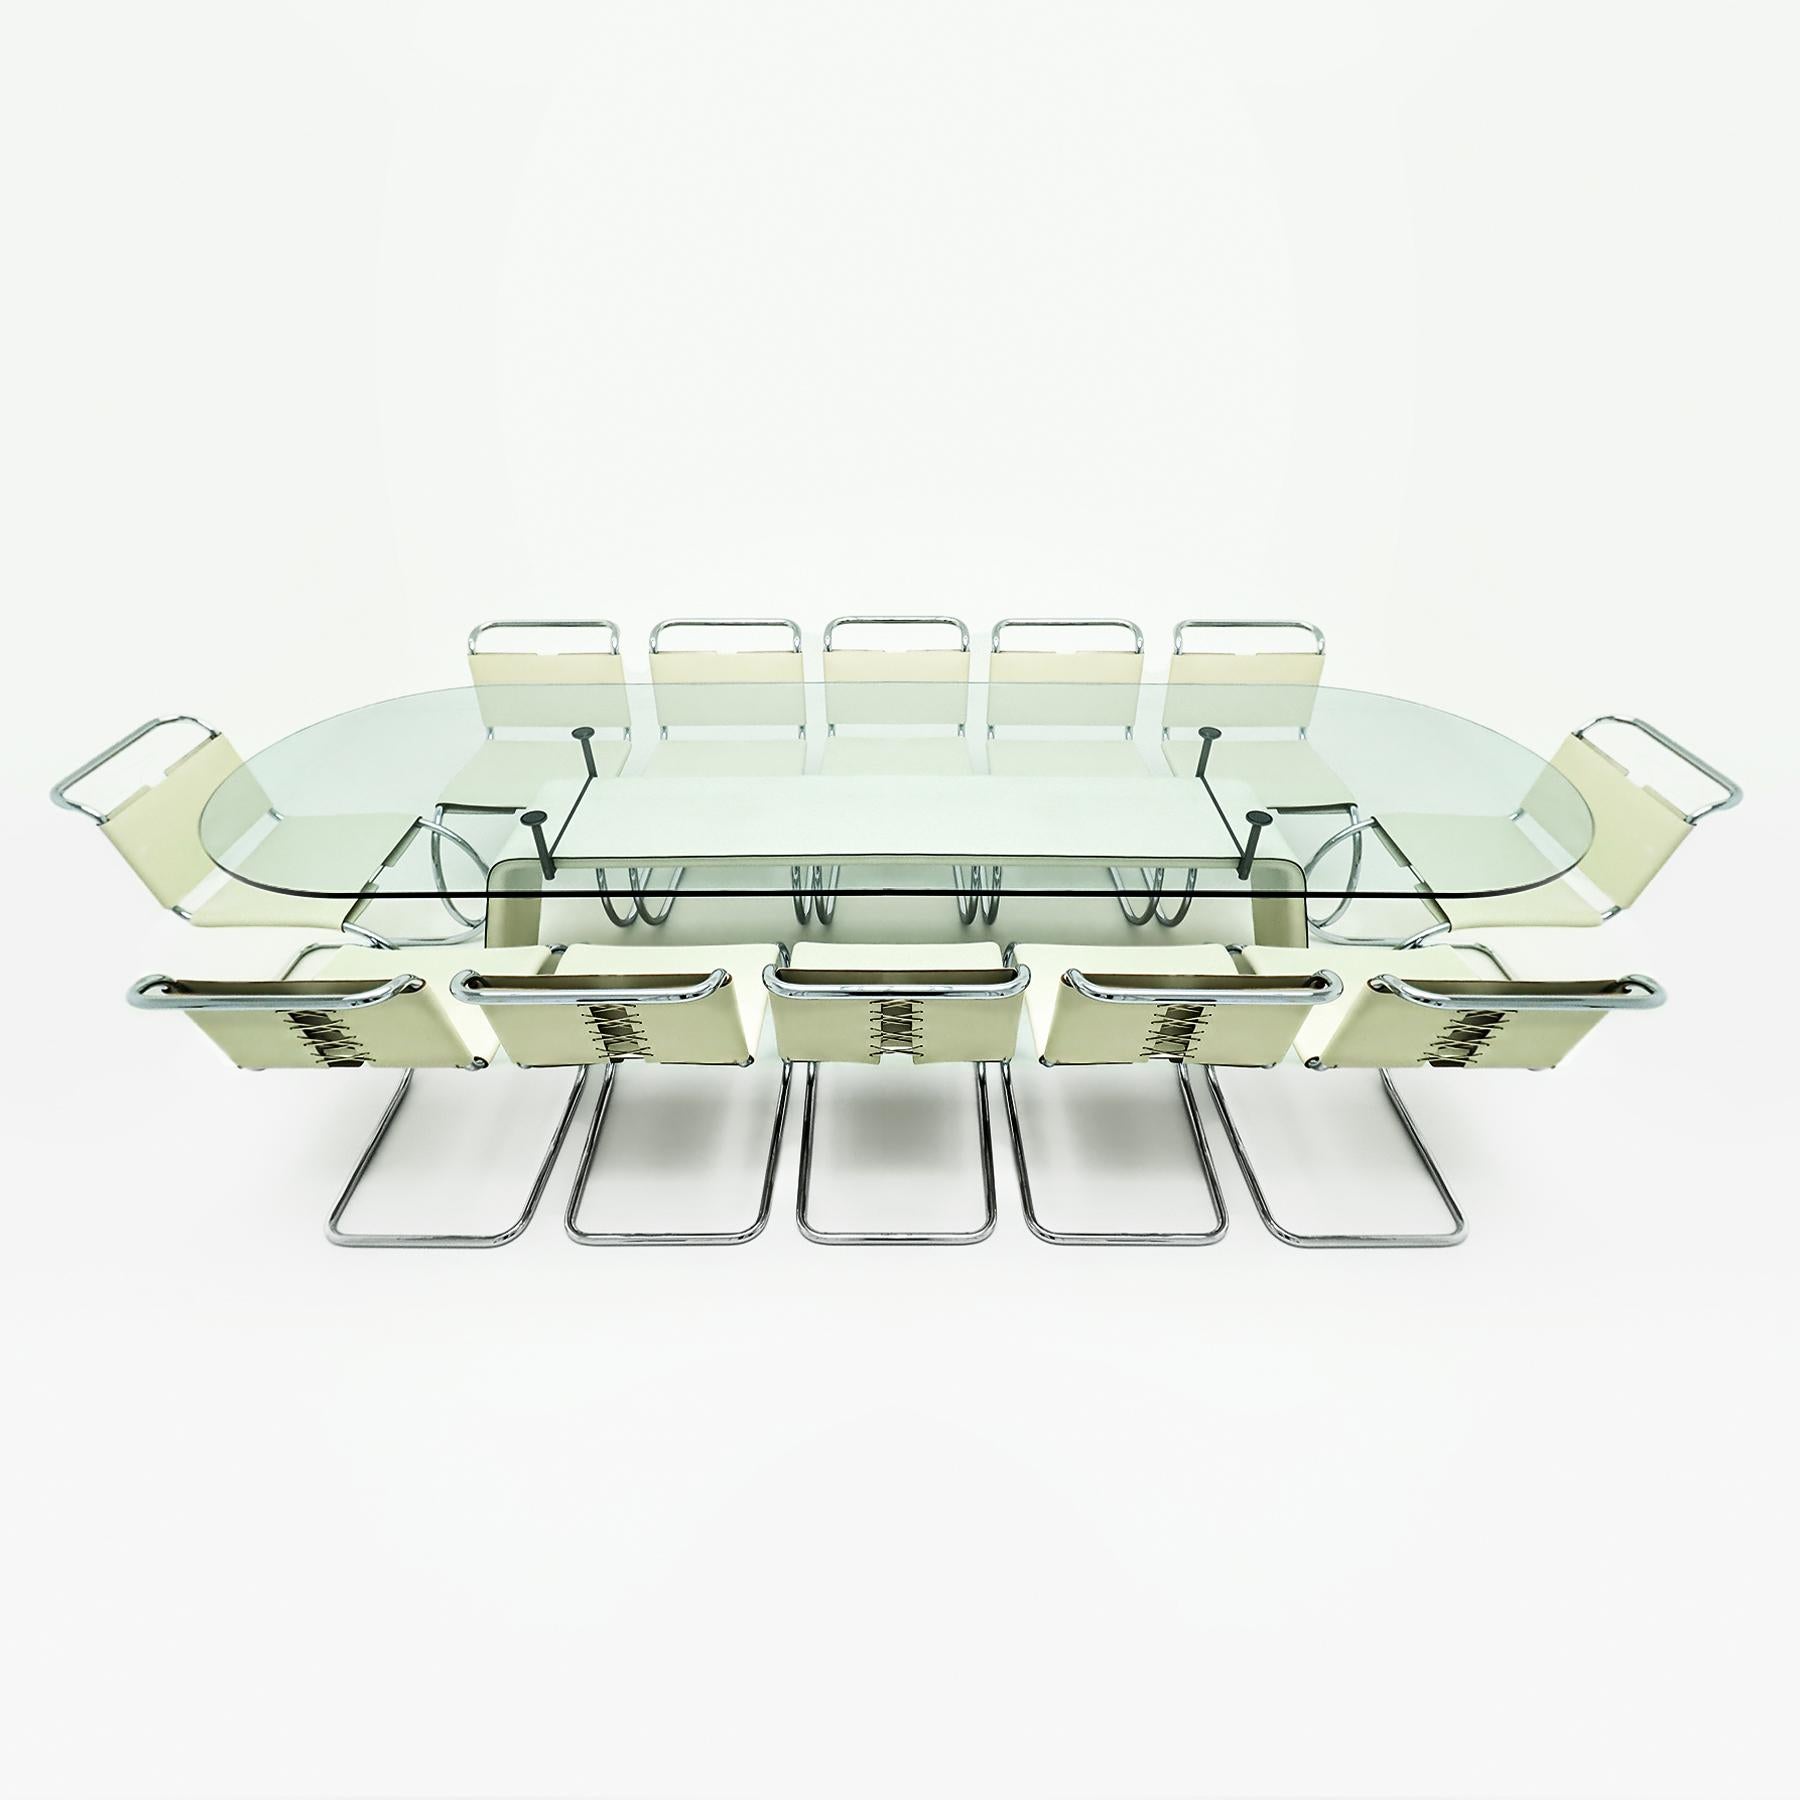 Bauhaus 12 Knoll, Mies van der Rohe MR10 chairs matched to a Matteo Grassi dining table